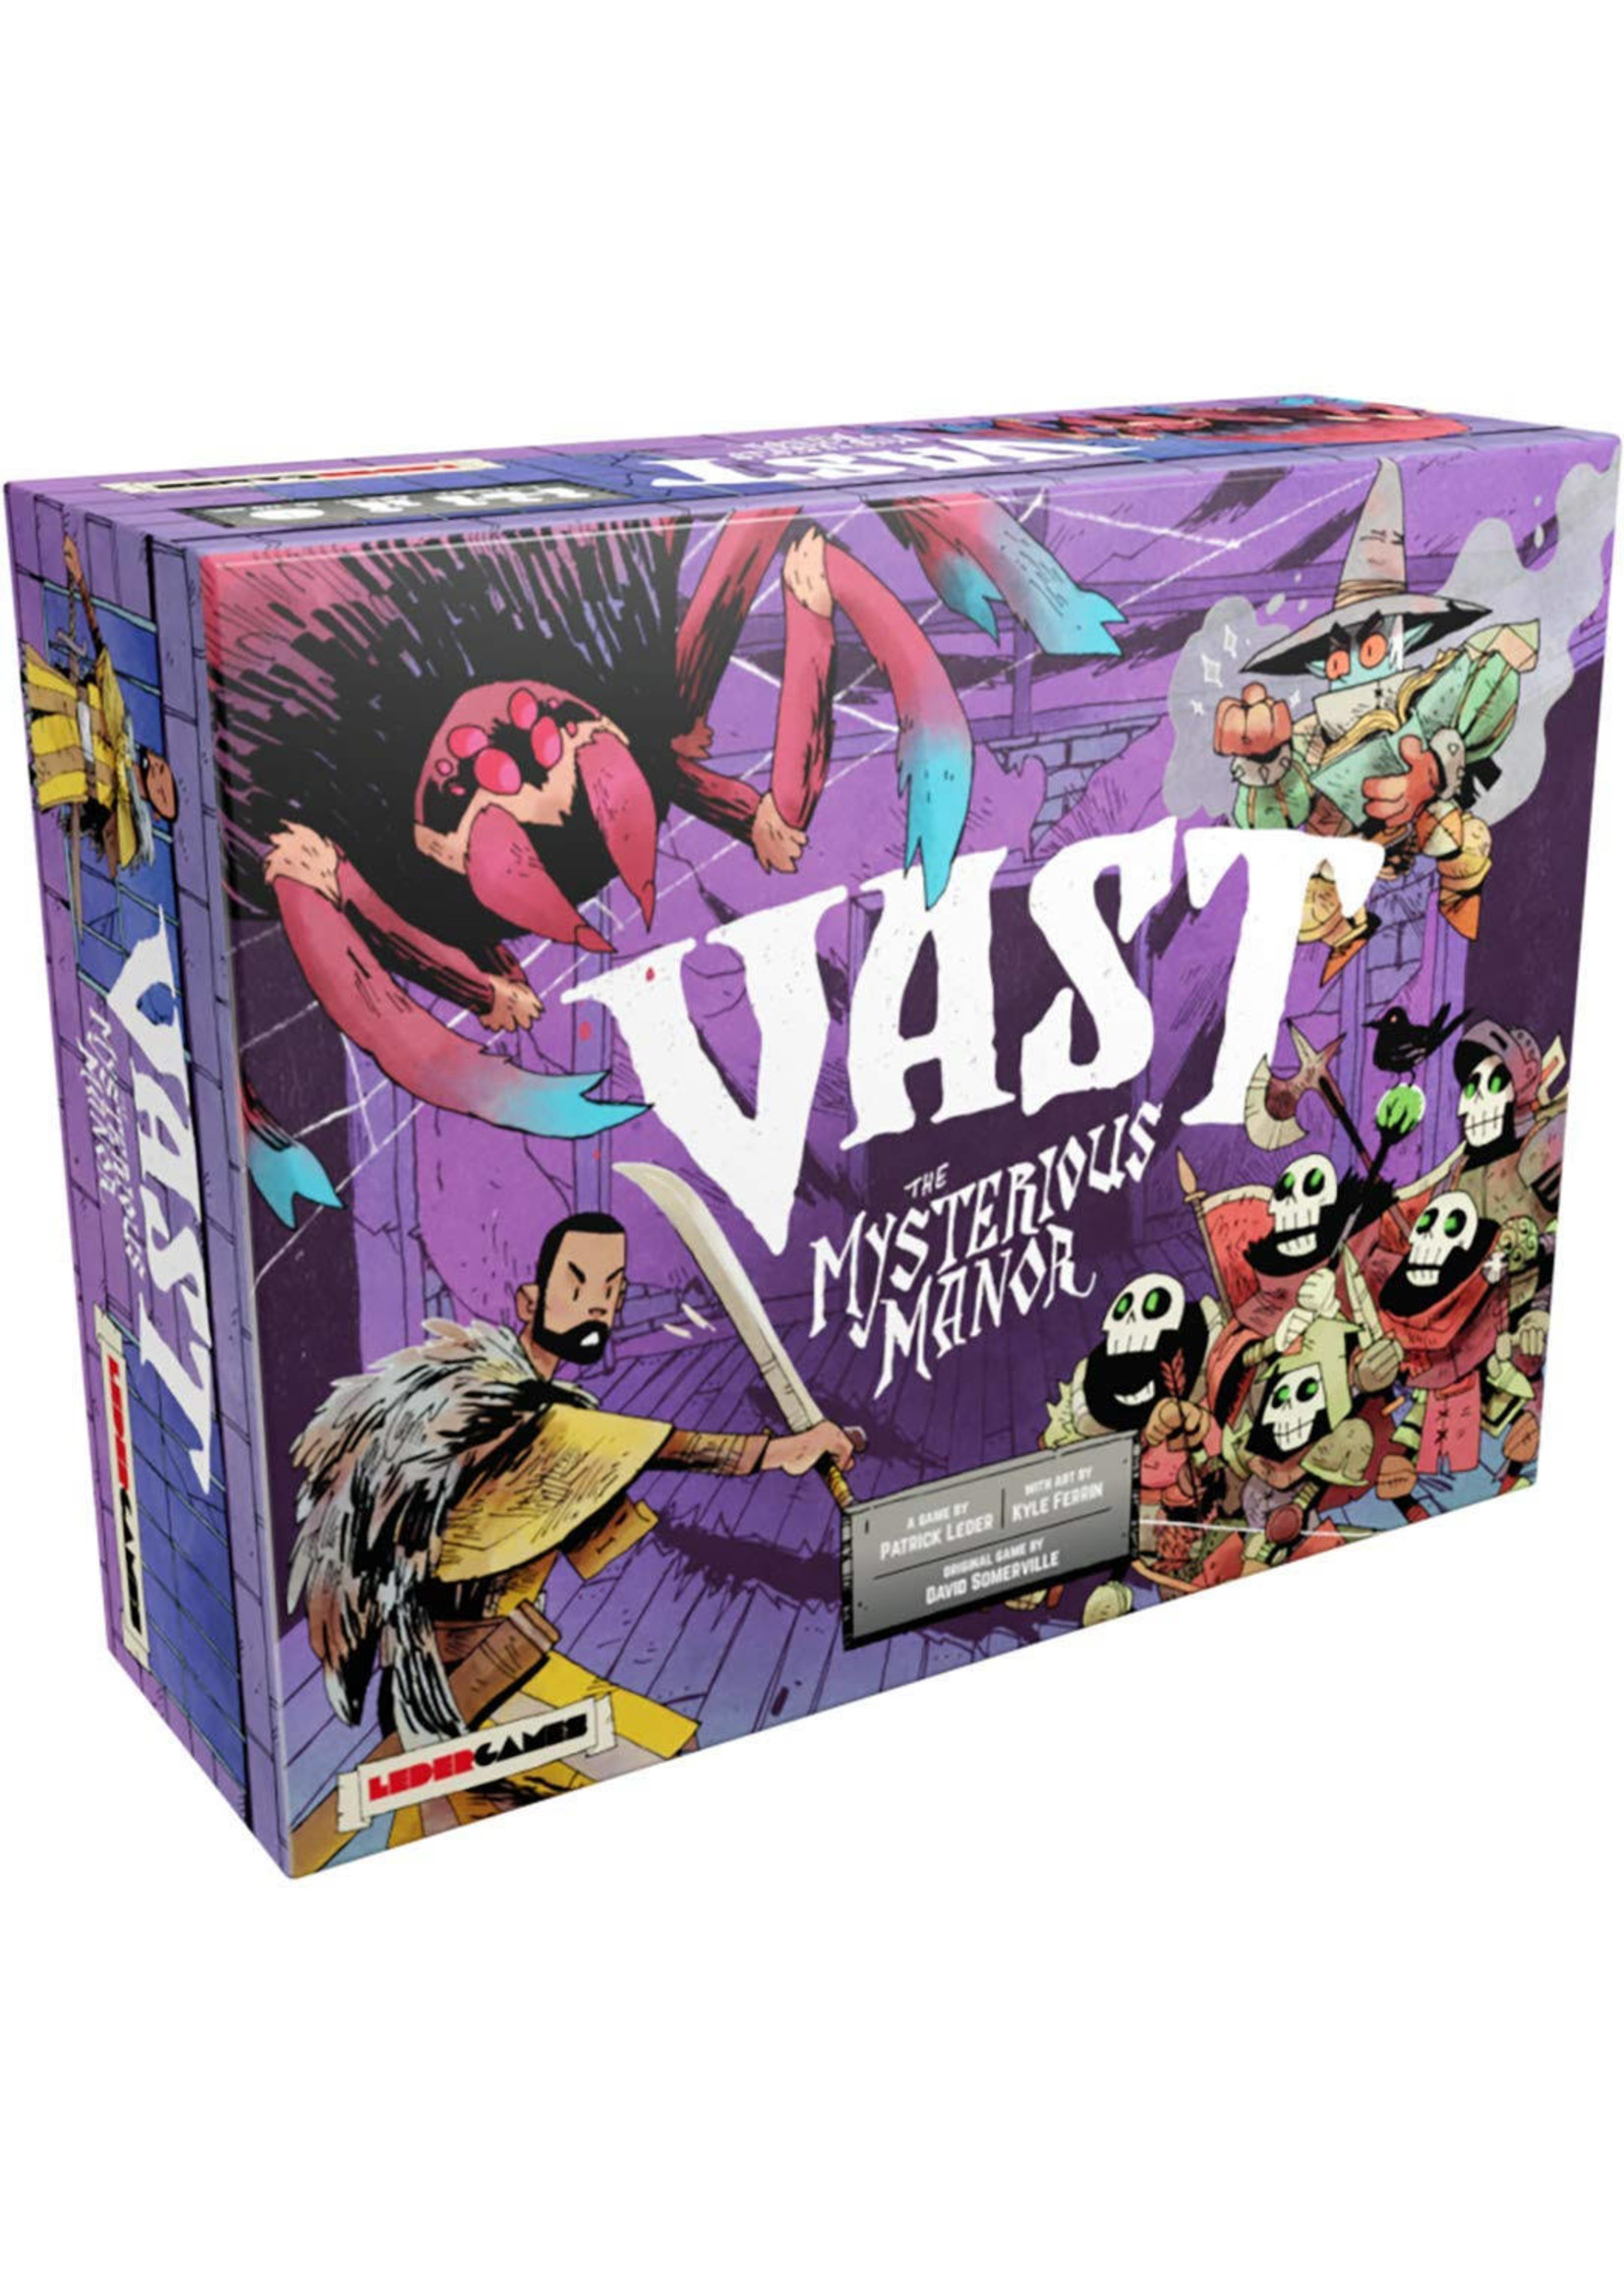 Vast: The Mysterious Manor (Standalone Game)